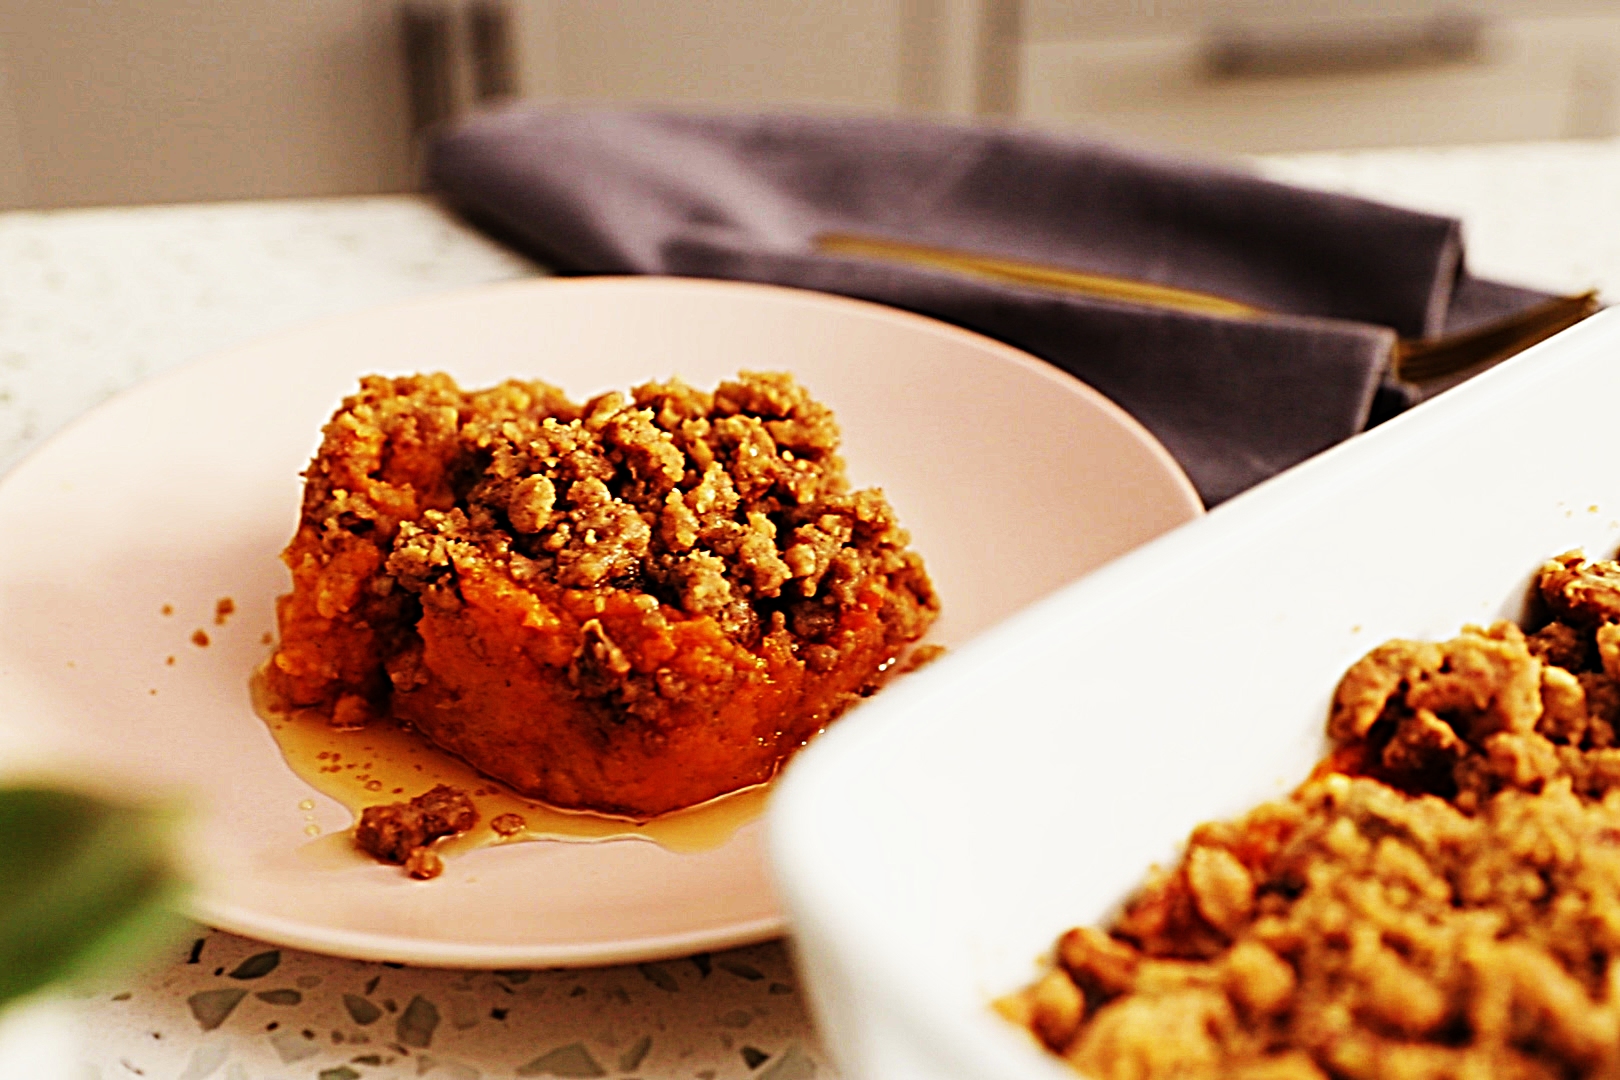 Stupid-Easy Recipe for Vegan Sweet Potato Casserole with Pecan Crumble (#1 Top-Rated)